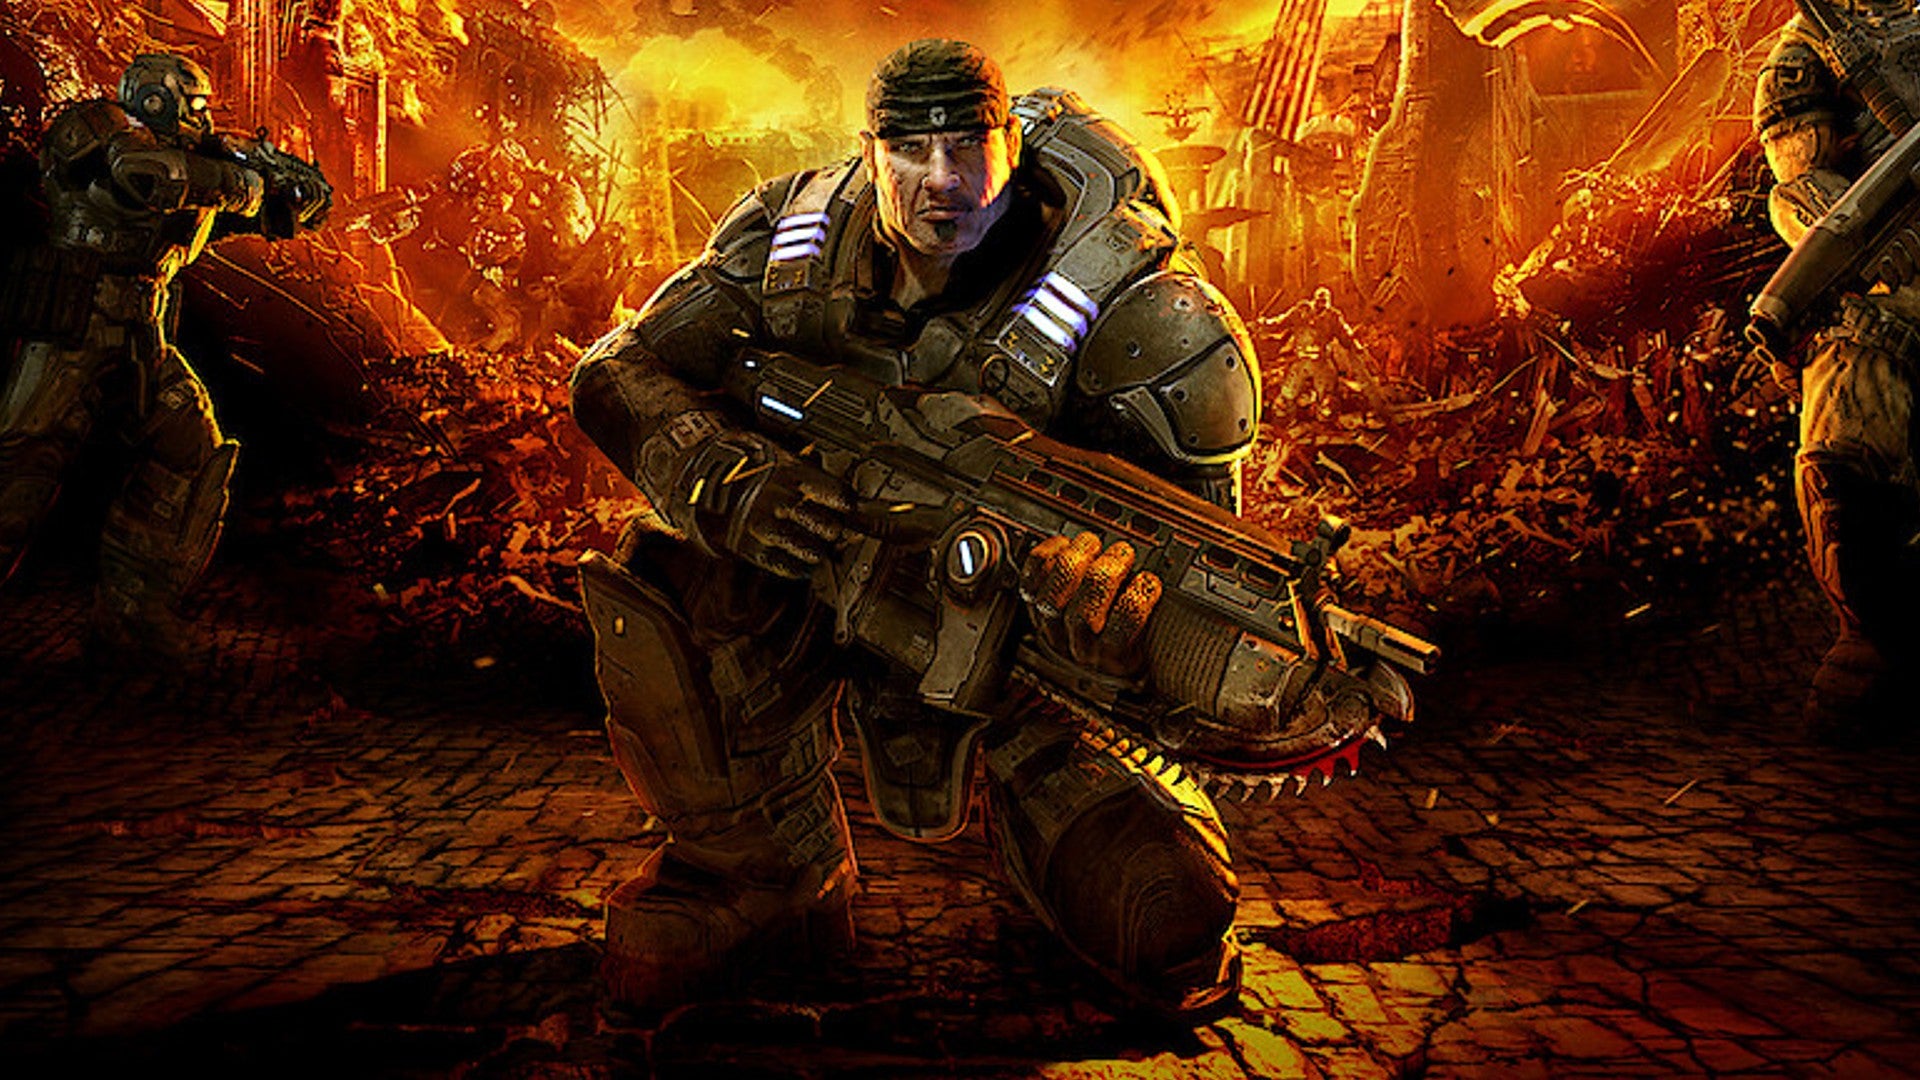 Key art from the Gears Of War series showing Marcus Fenix